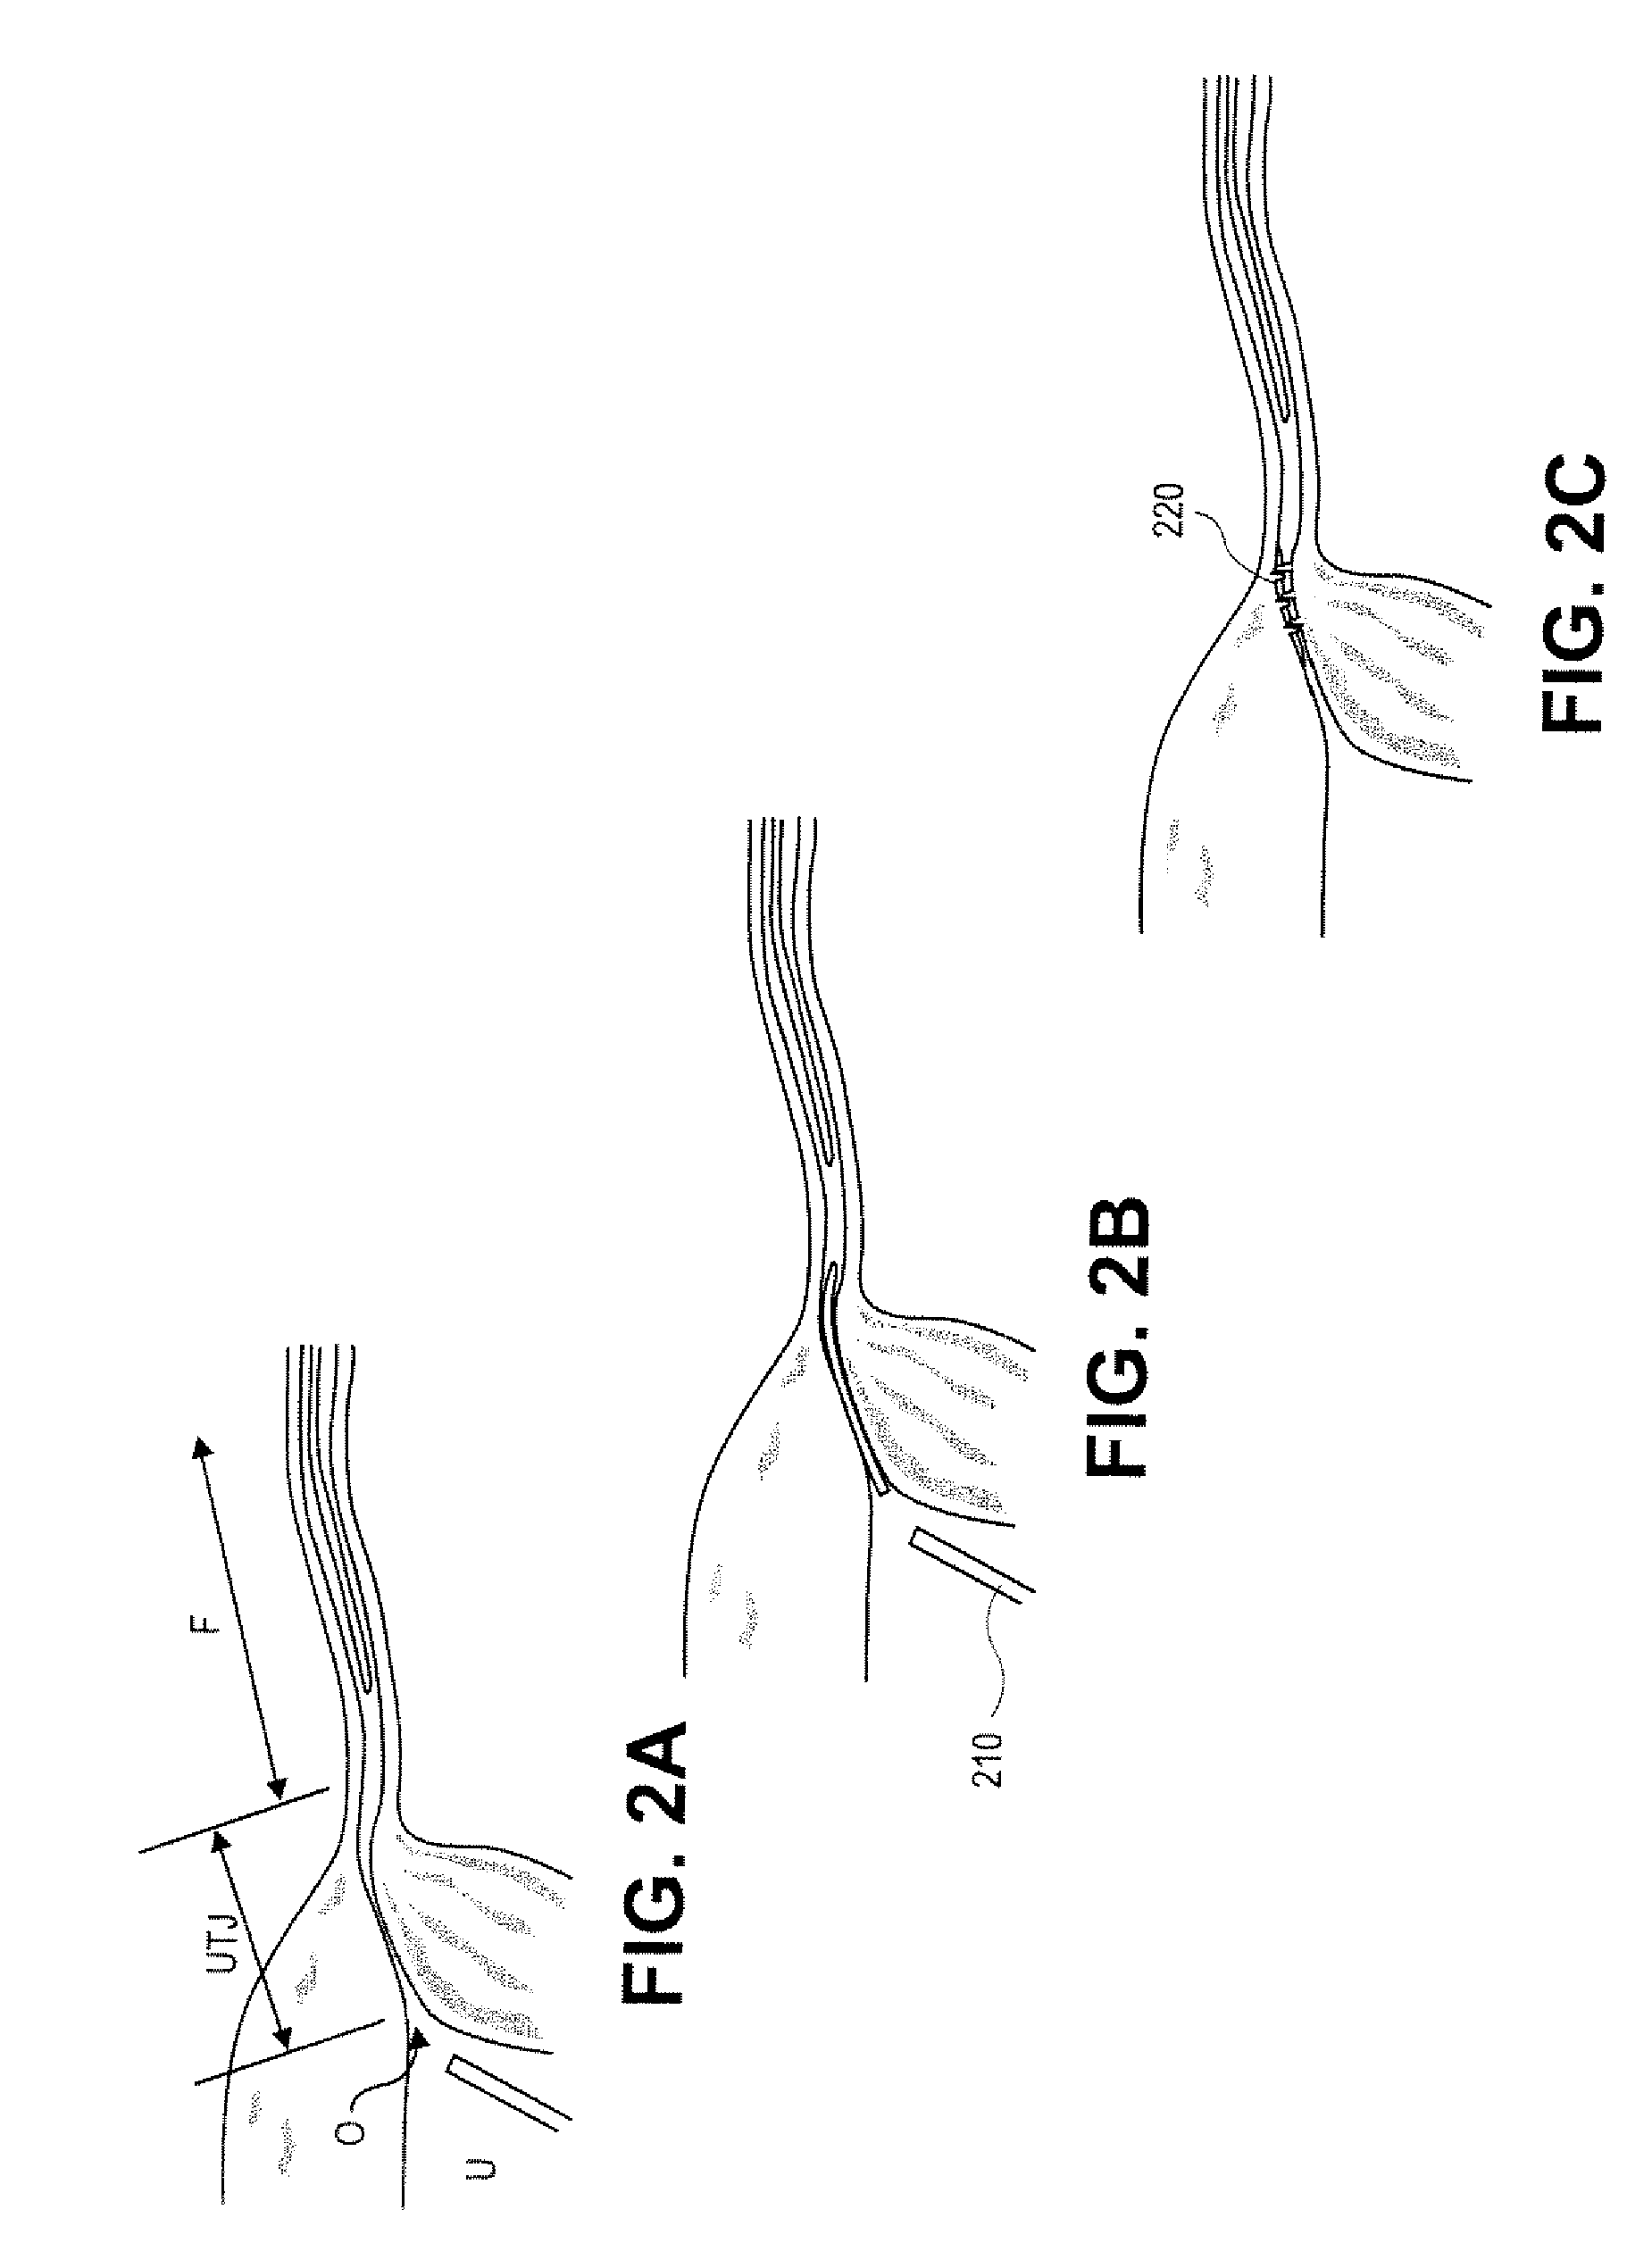 Devices and methods for occluding a fallopian tube